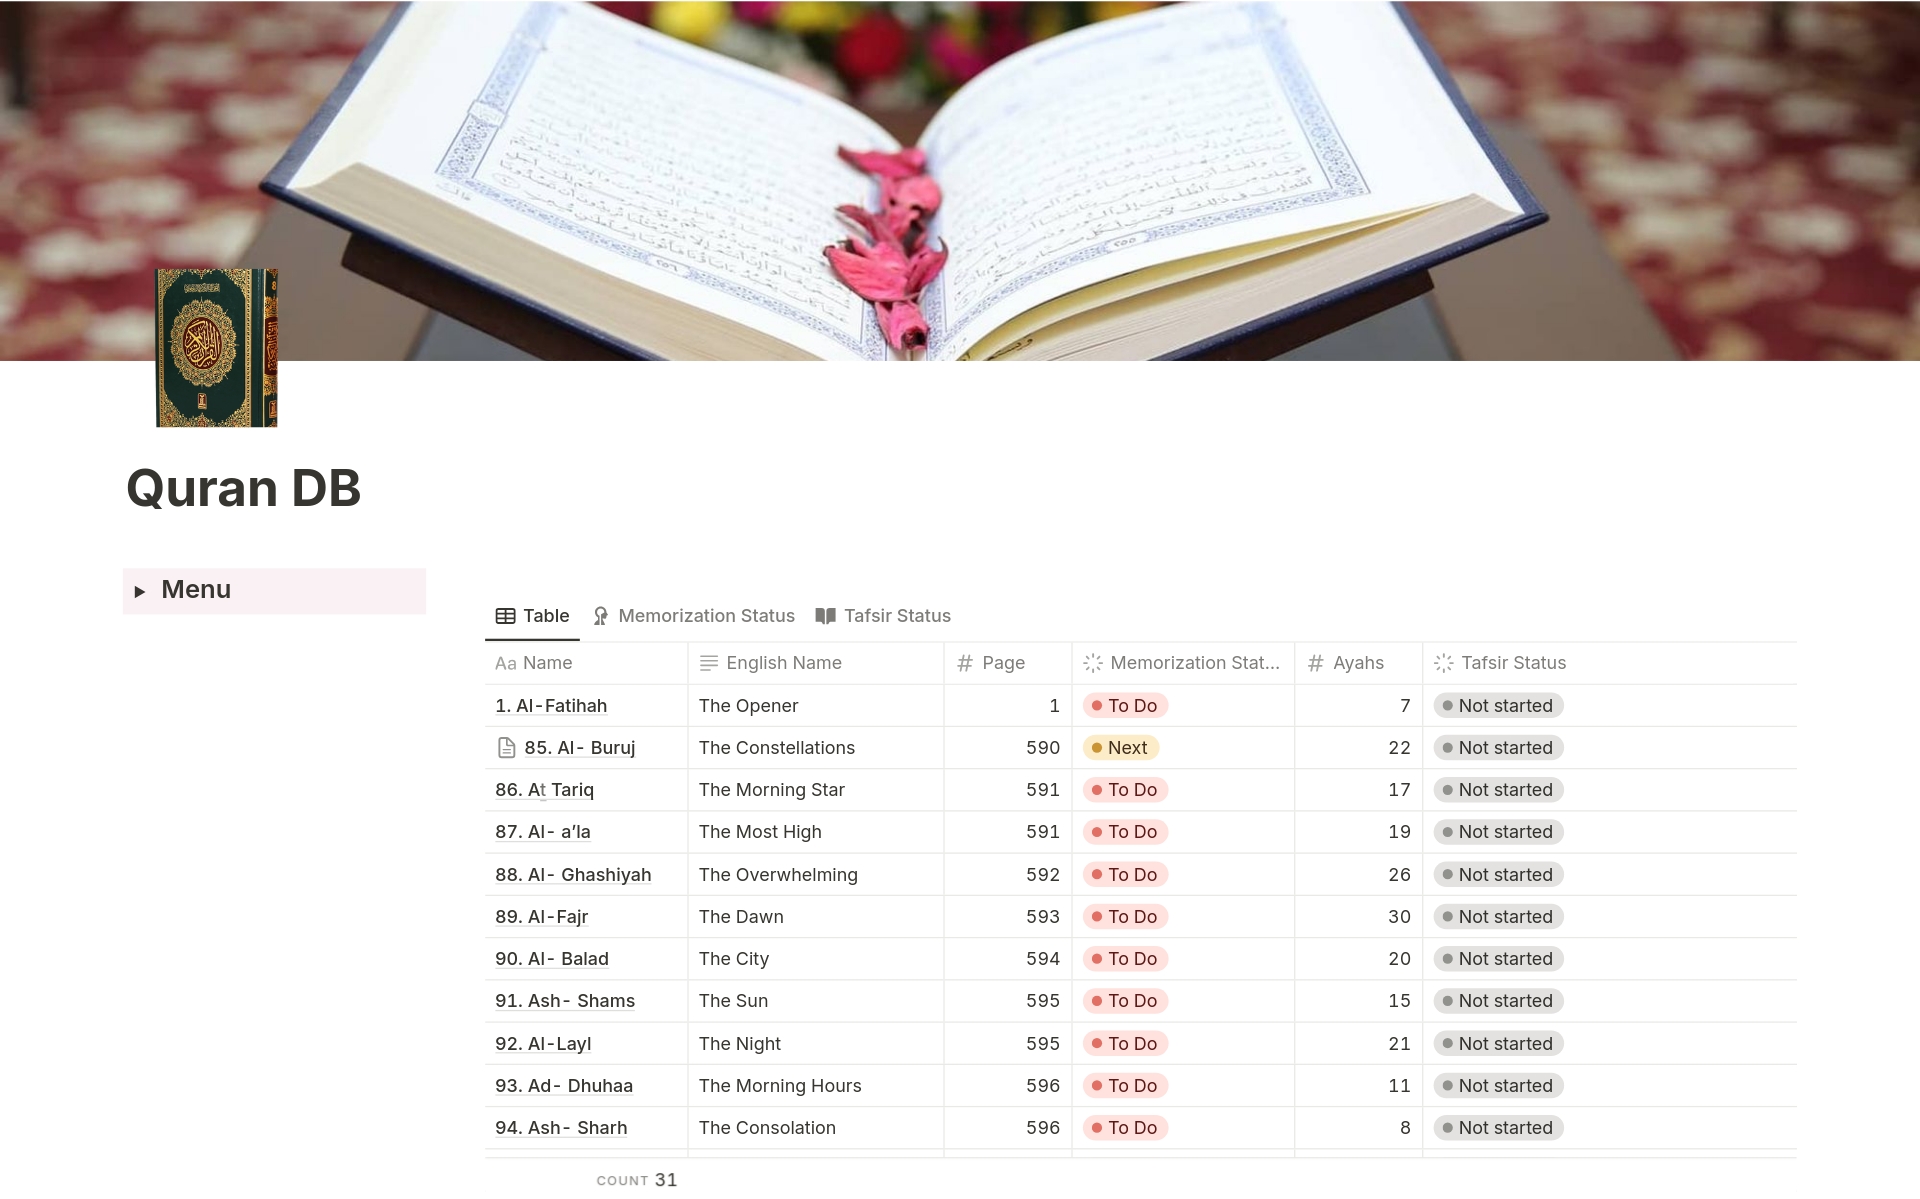 Introducing the 🌙 Ramadan Planner+Tracker 2024, a Notion template that will help you finish the Ramadan with

😌Peace
🤩Clarity
✅Ramadan goals DONE

It’s $79 but I am giving first 50 copies for FREE 💝

🚨 Limited copies only